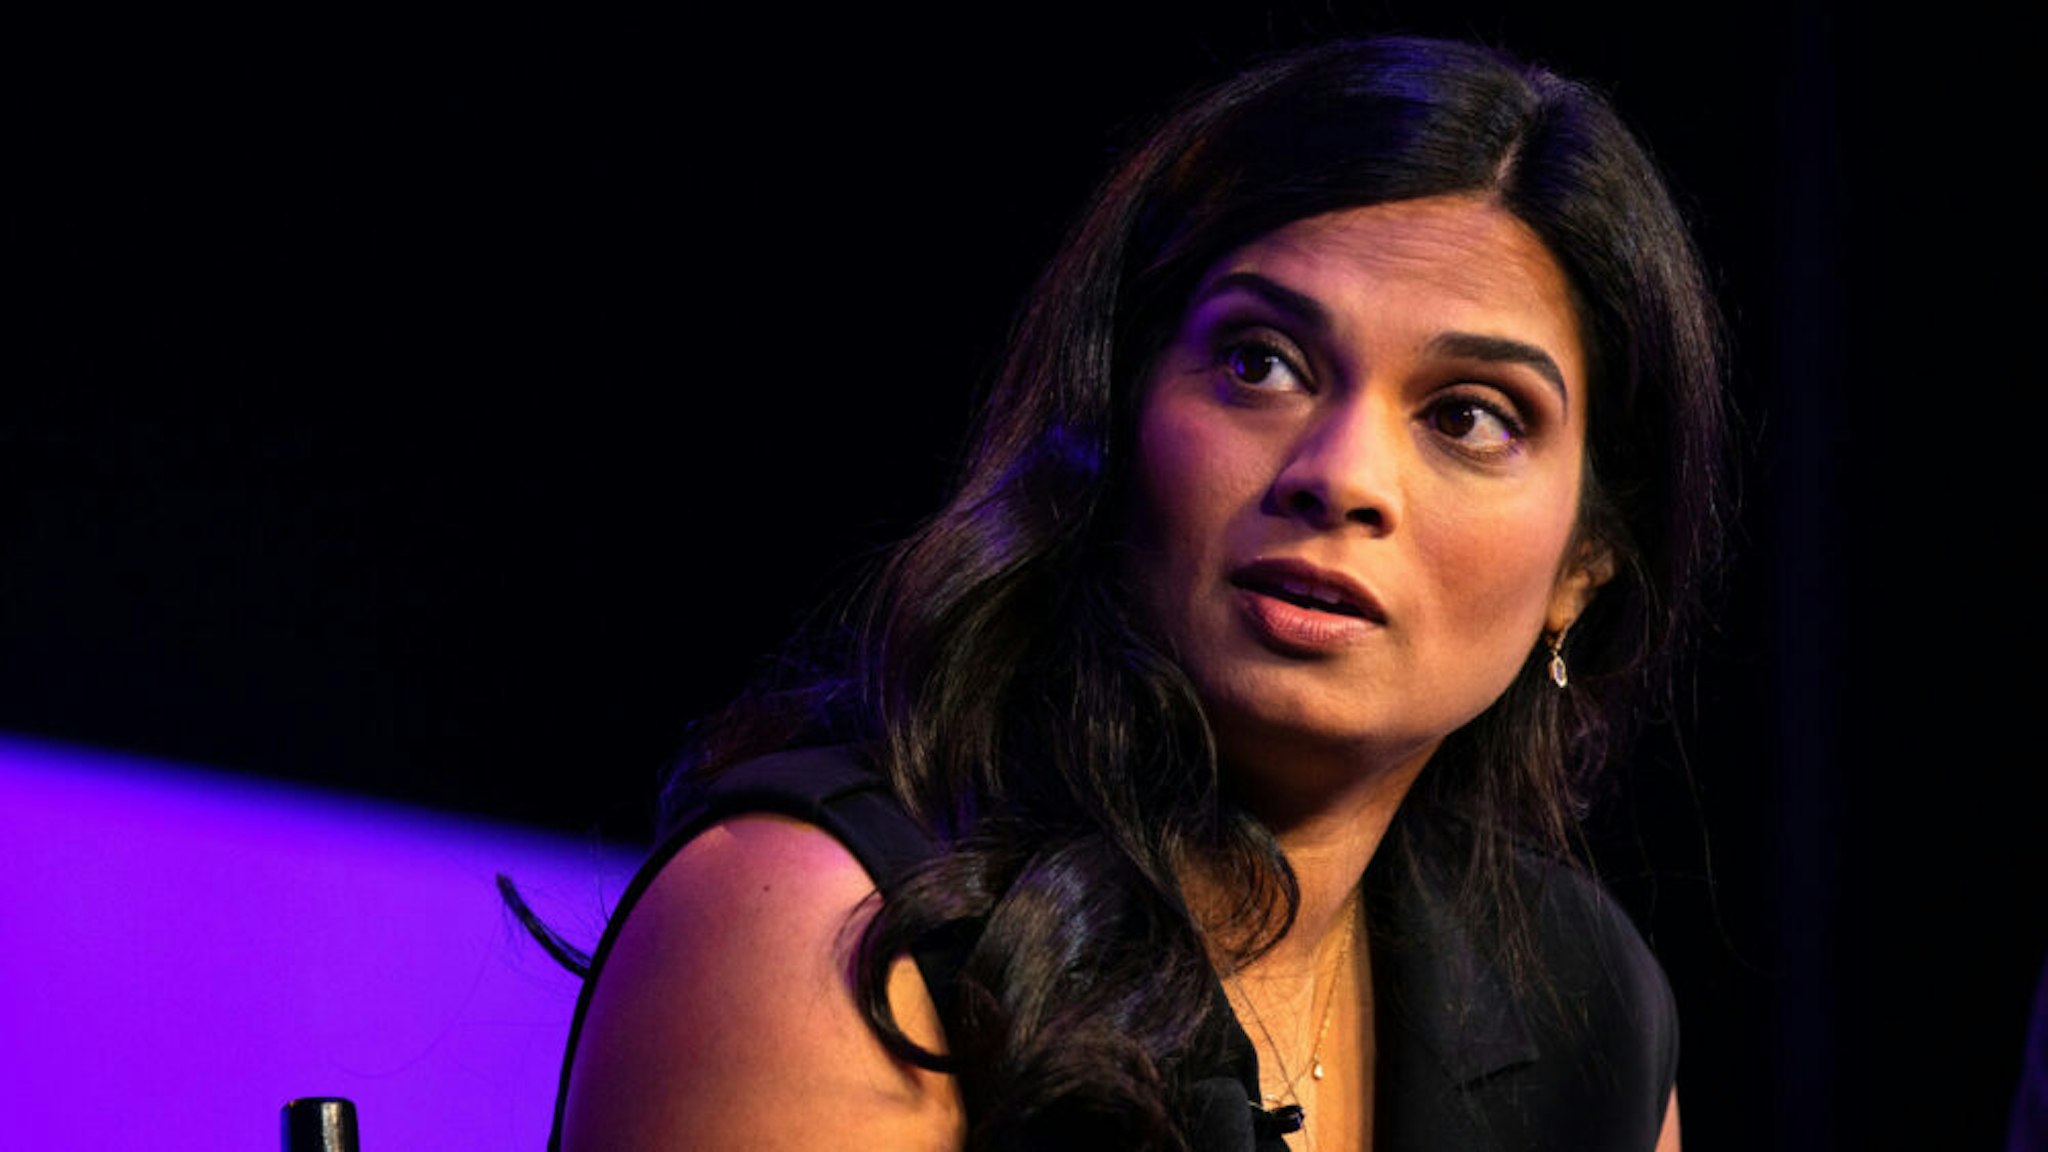 Vijaya Gadde, chief legal officer of Twitter Inc., speaks during the Wall Street Journal Tech Live global technology conference in Laguna Beach, California, U.S., on Monday, Oct. 21, 2019. The event brings together investors, founders, and executives to foster innovation and drive growth within the tech industry.